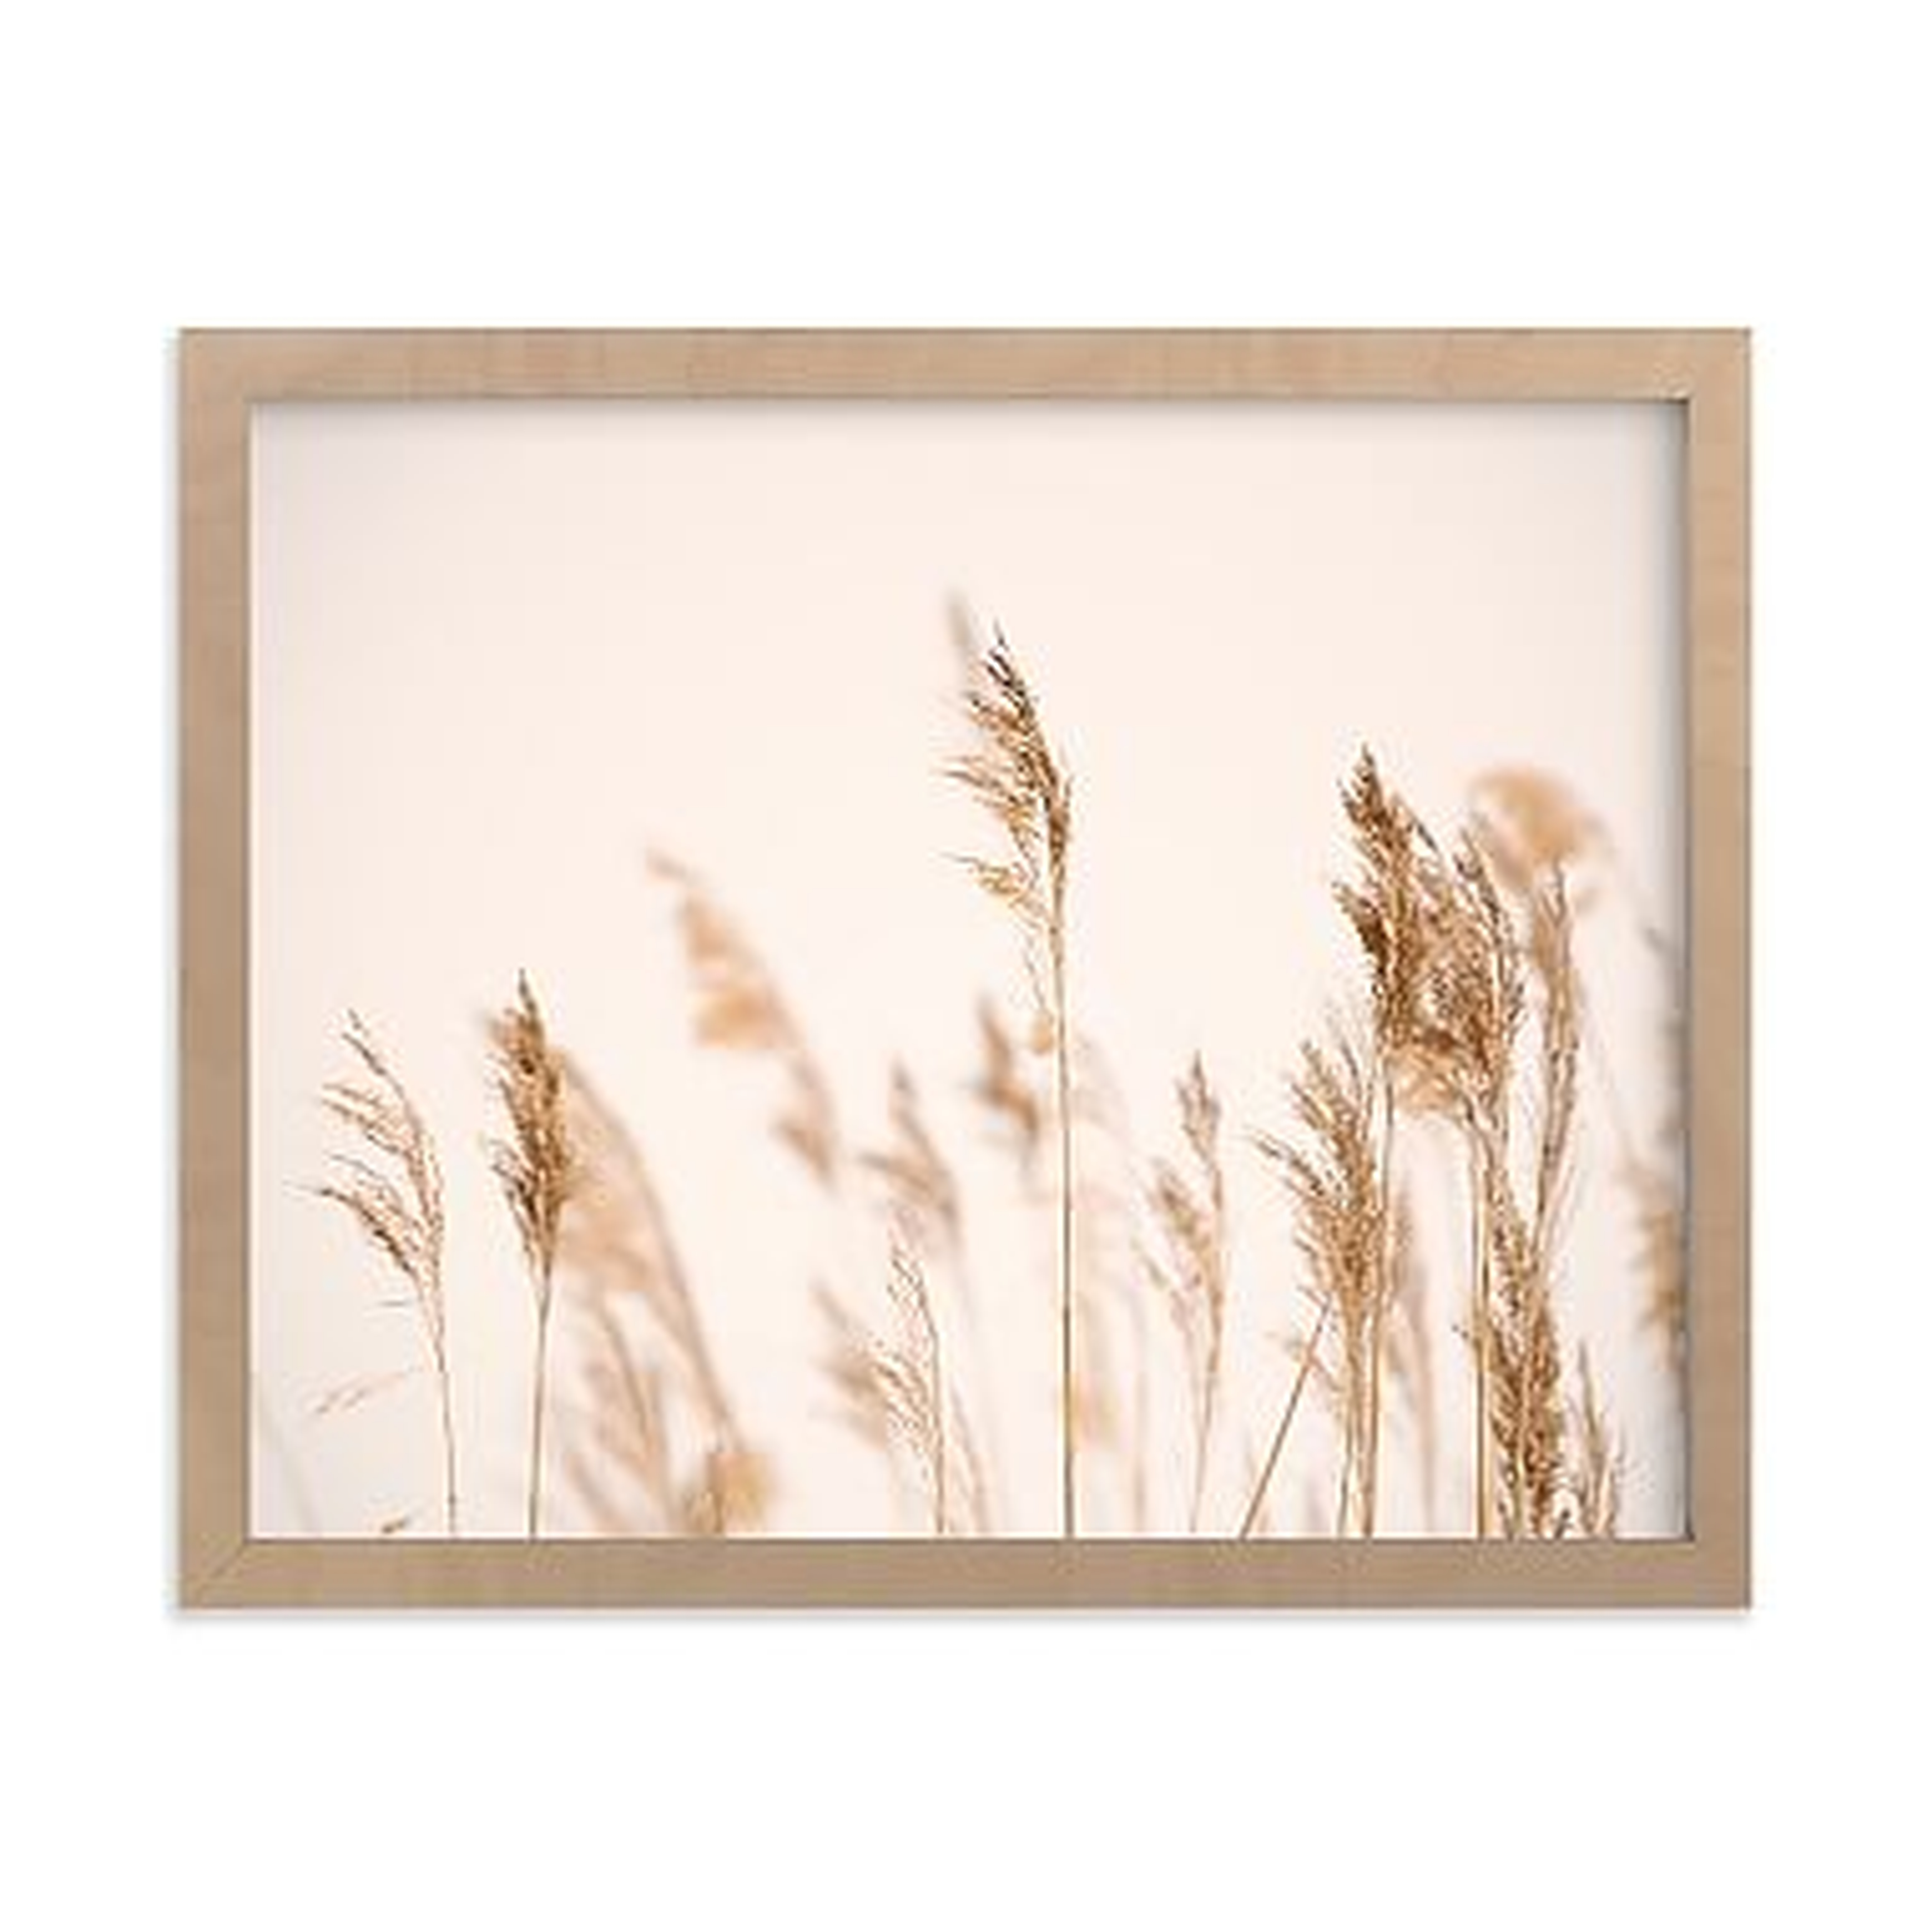 Summer Weeds Framed Art by Minted(R), Natural, 8x10 - Pottery Barn Teen